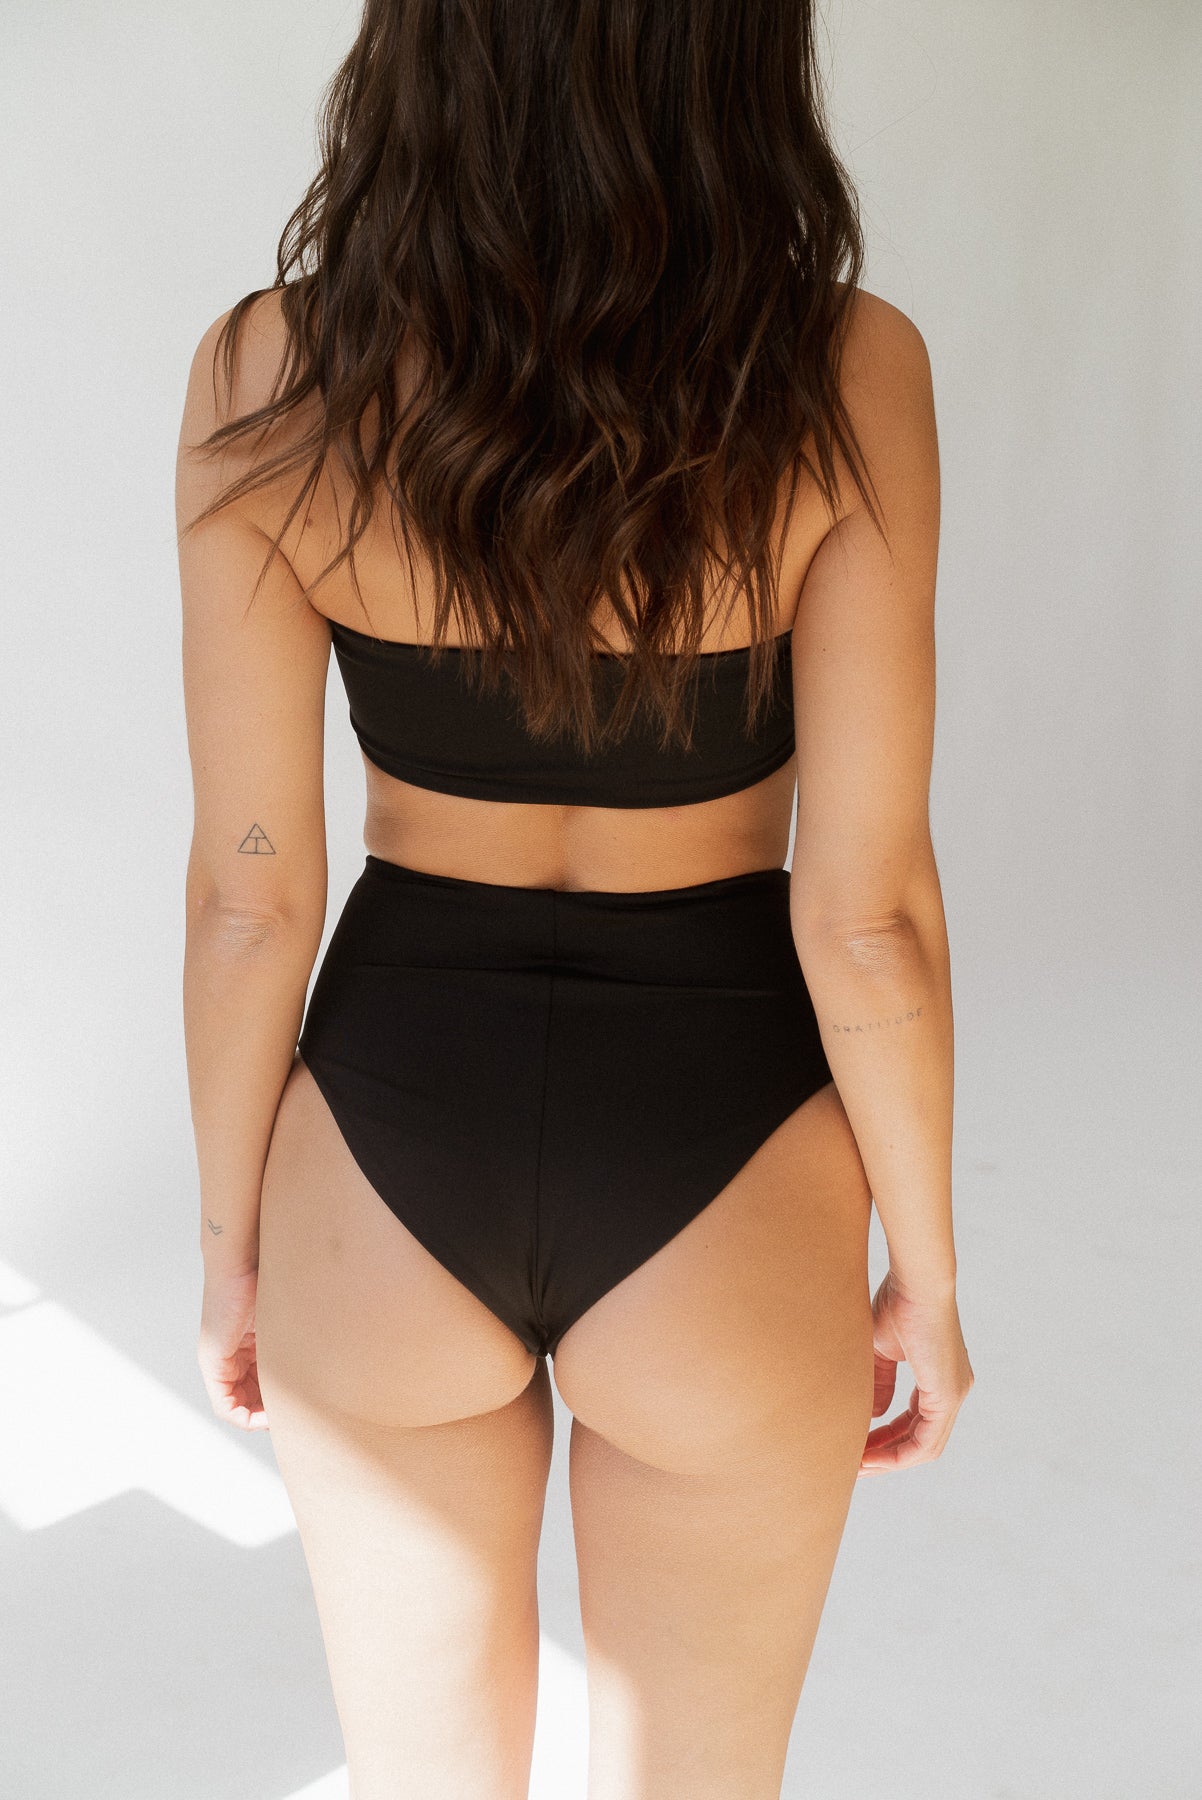 ANGIMELO, Swim, Womenscroptop High Waisted Swimsuits